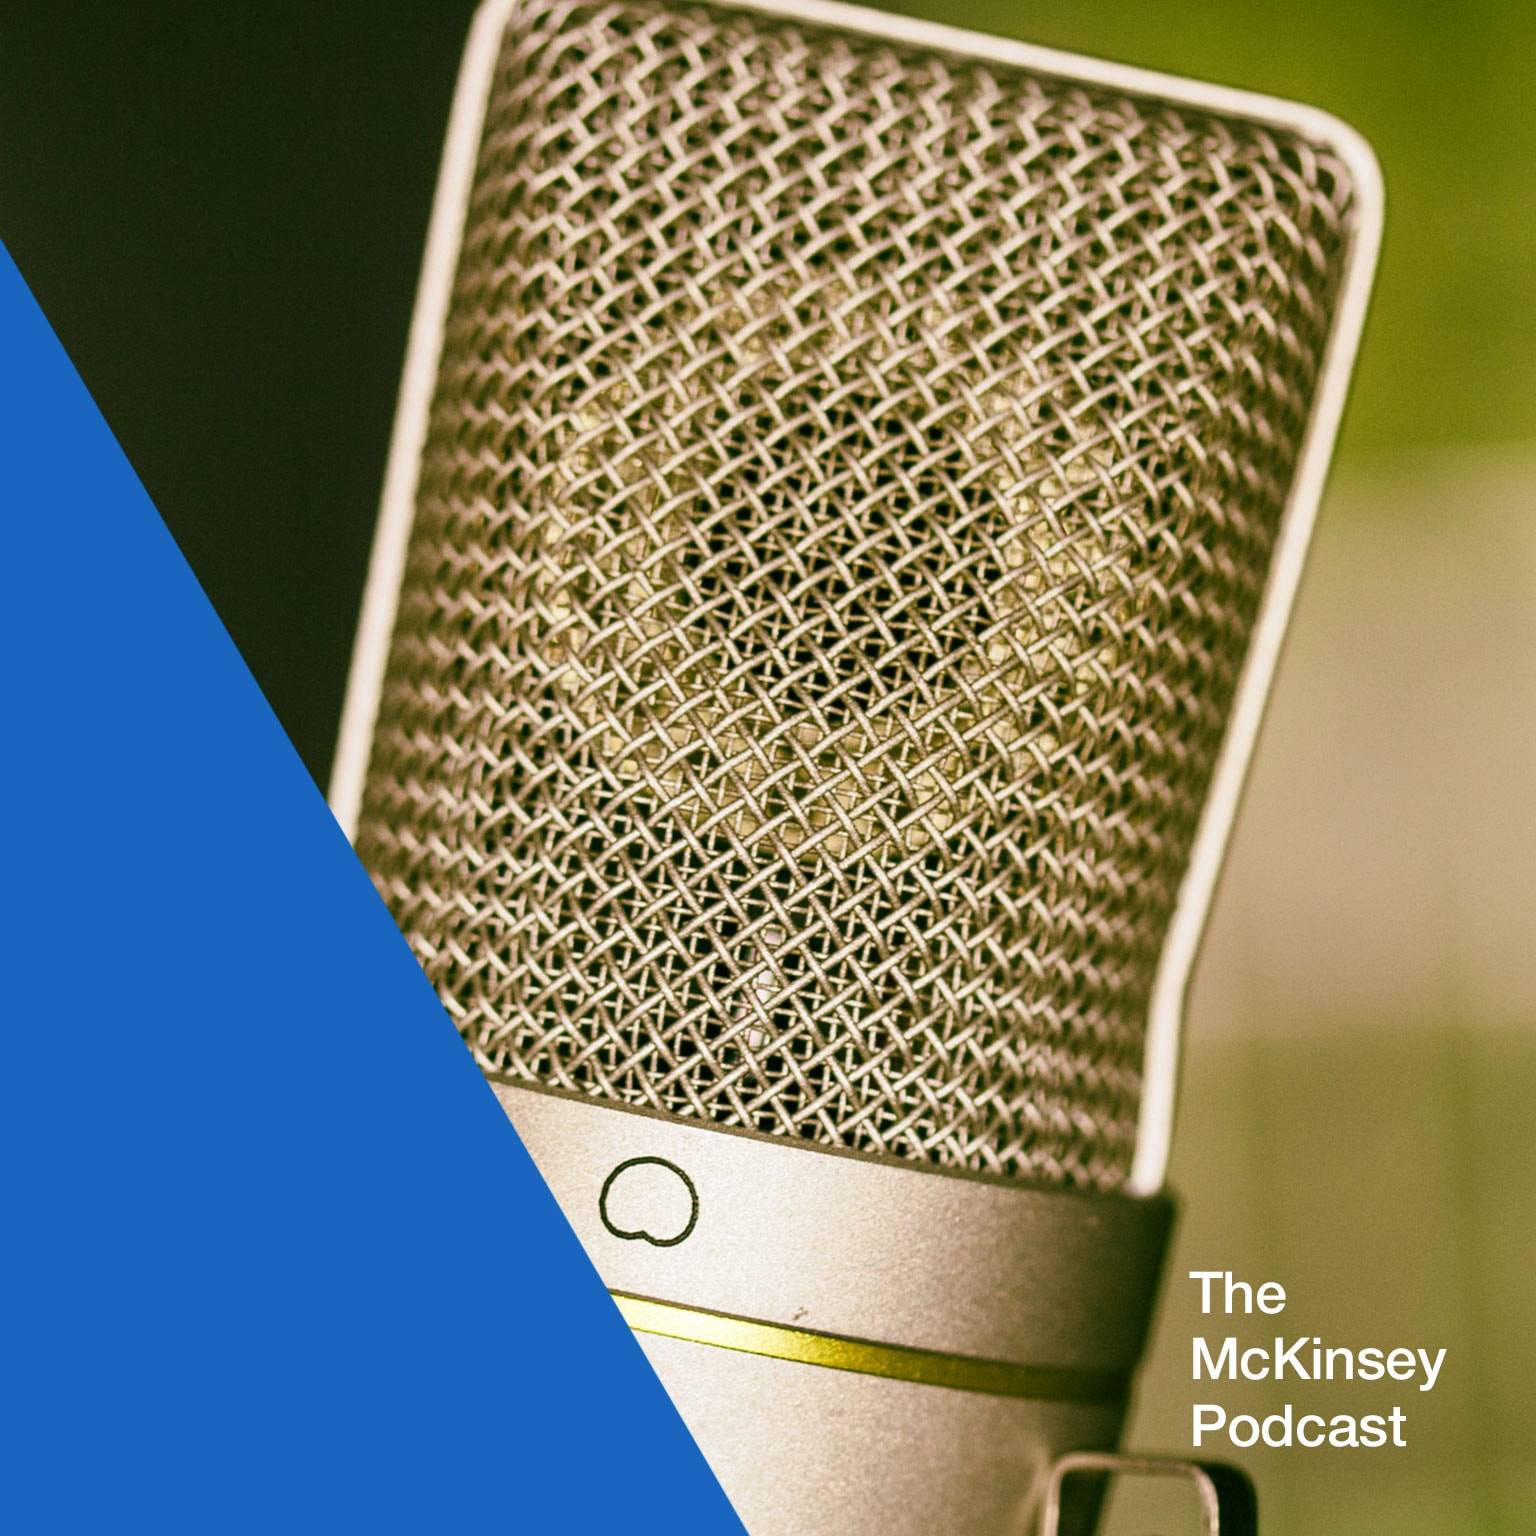 The McKinsey Podcast on Business & Management | McKinsey & Company